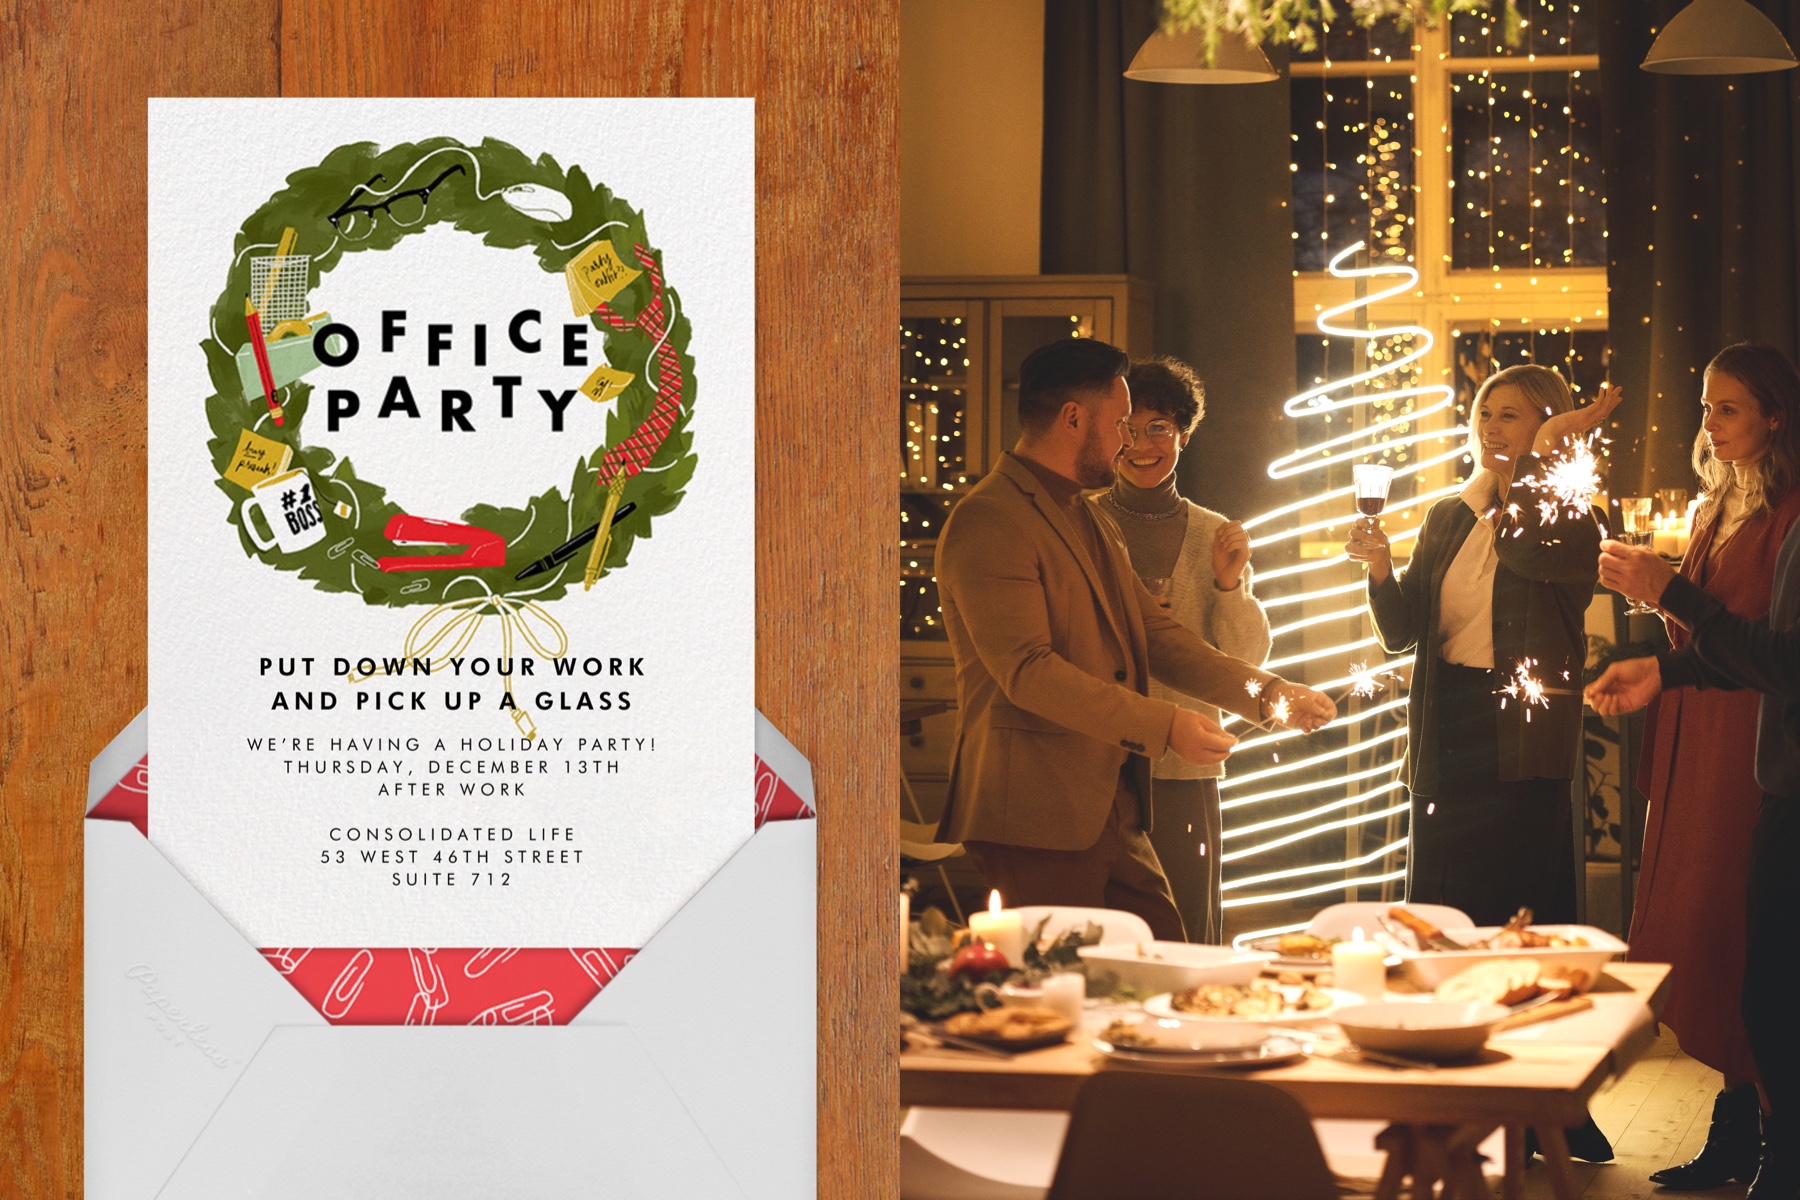 Left: An invitation that reads “Office party” with a wreath covered in office supplies. Right: People gather around food and an abstract Christmas tree design.